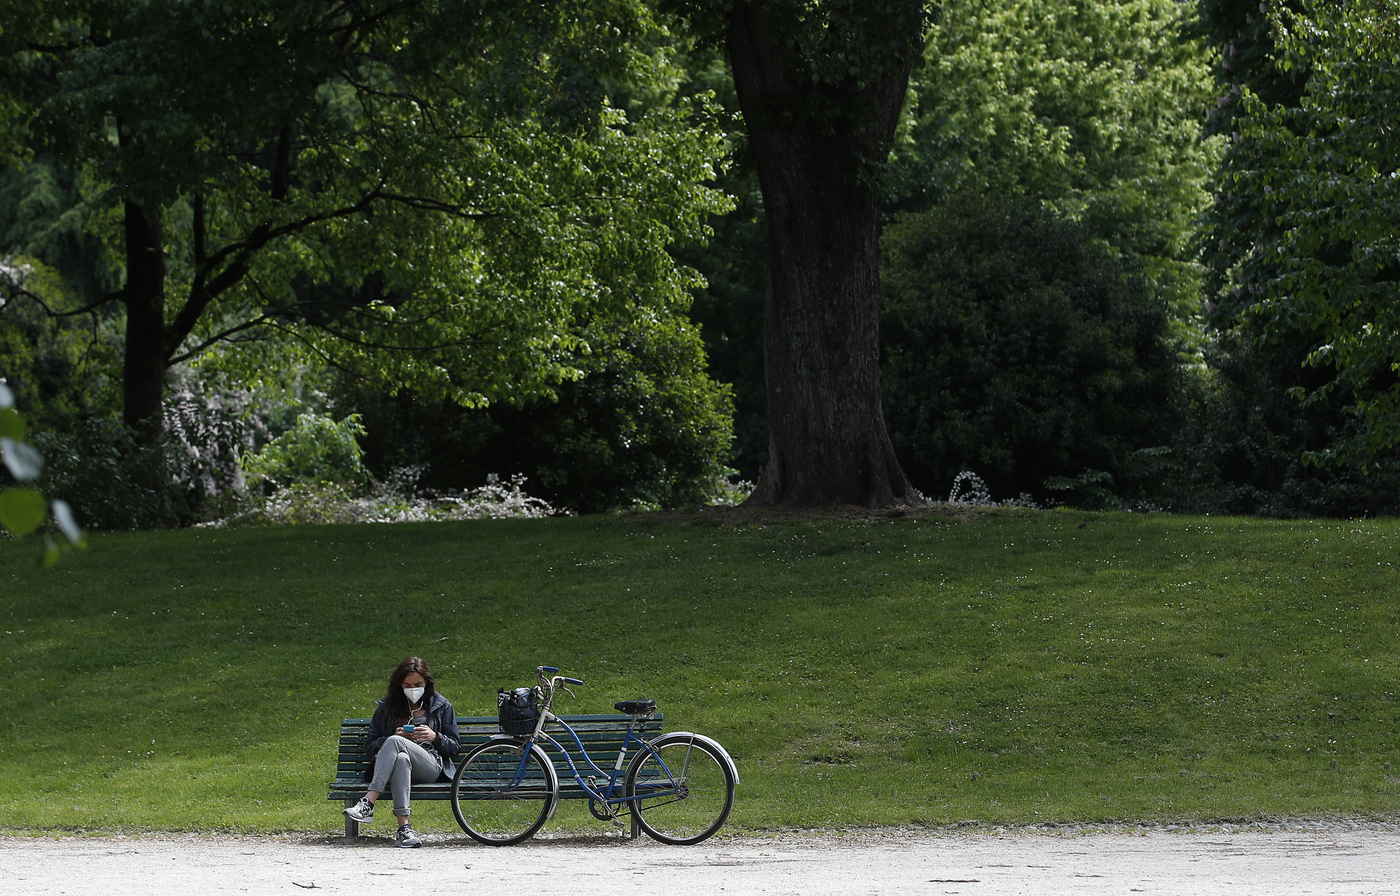 A woman sits by her bike on a bench in a park which reopened after several weeks of closure, in Milan, Italy, Monday, May 4, 2020. Italy began stirring again Monday after a two-month coronavirus shutdown, with 4.4 million Italians able to return to work and restrictions on movement eased in the first European country to lock down in a bid to stem COVID-19 infections.  (AP Photo/Antonio Calanni)